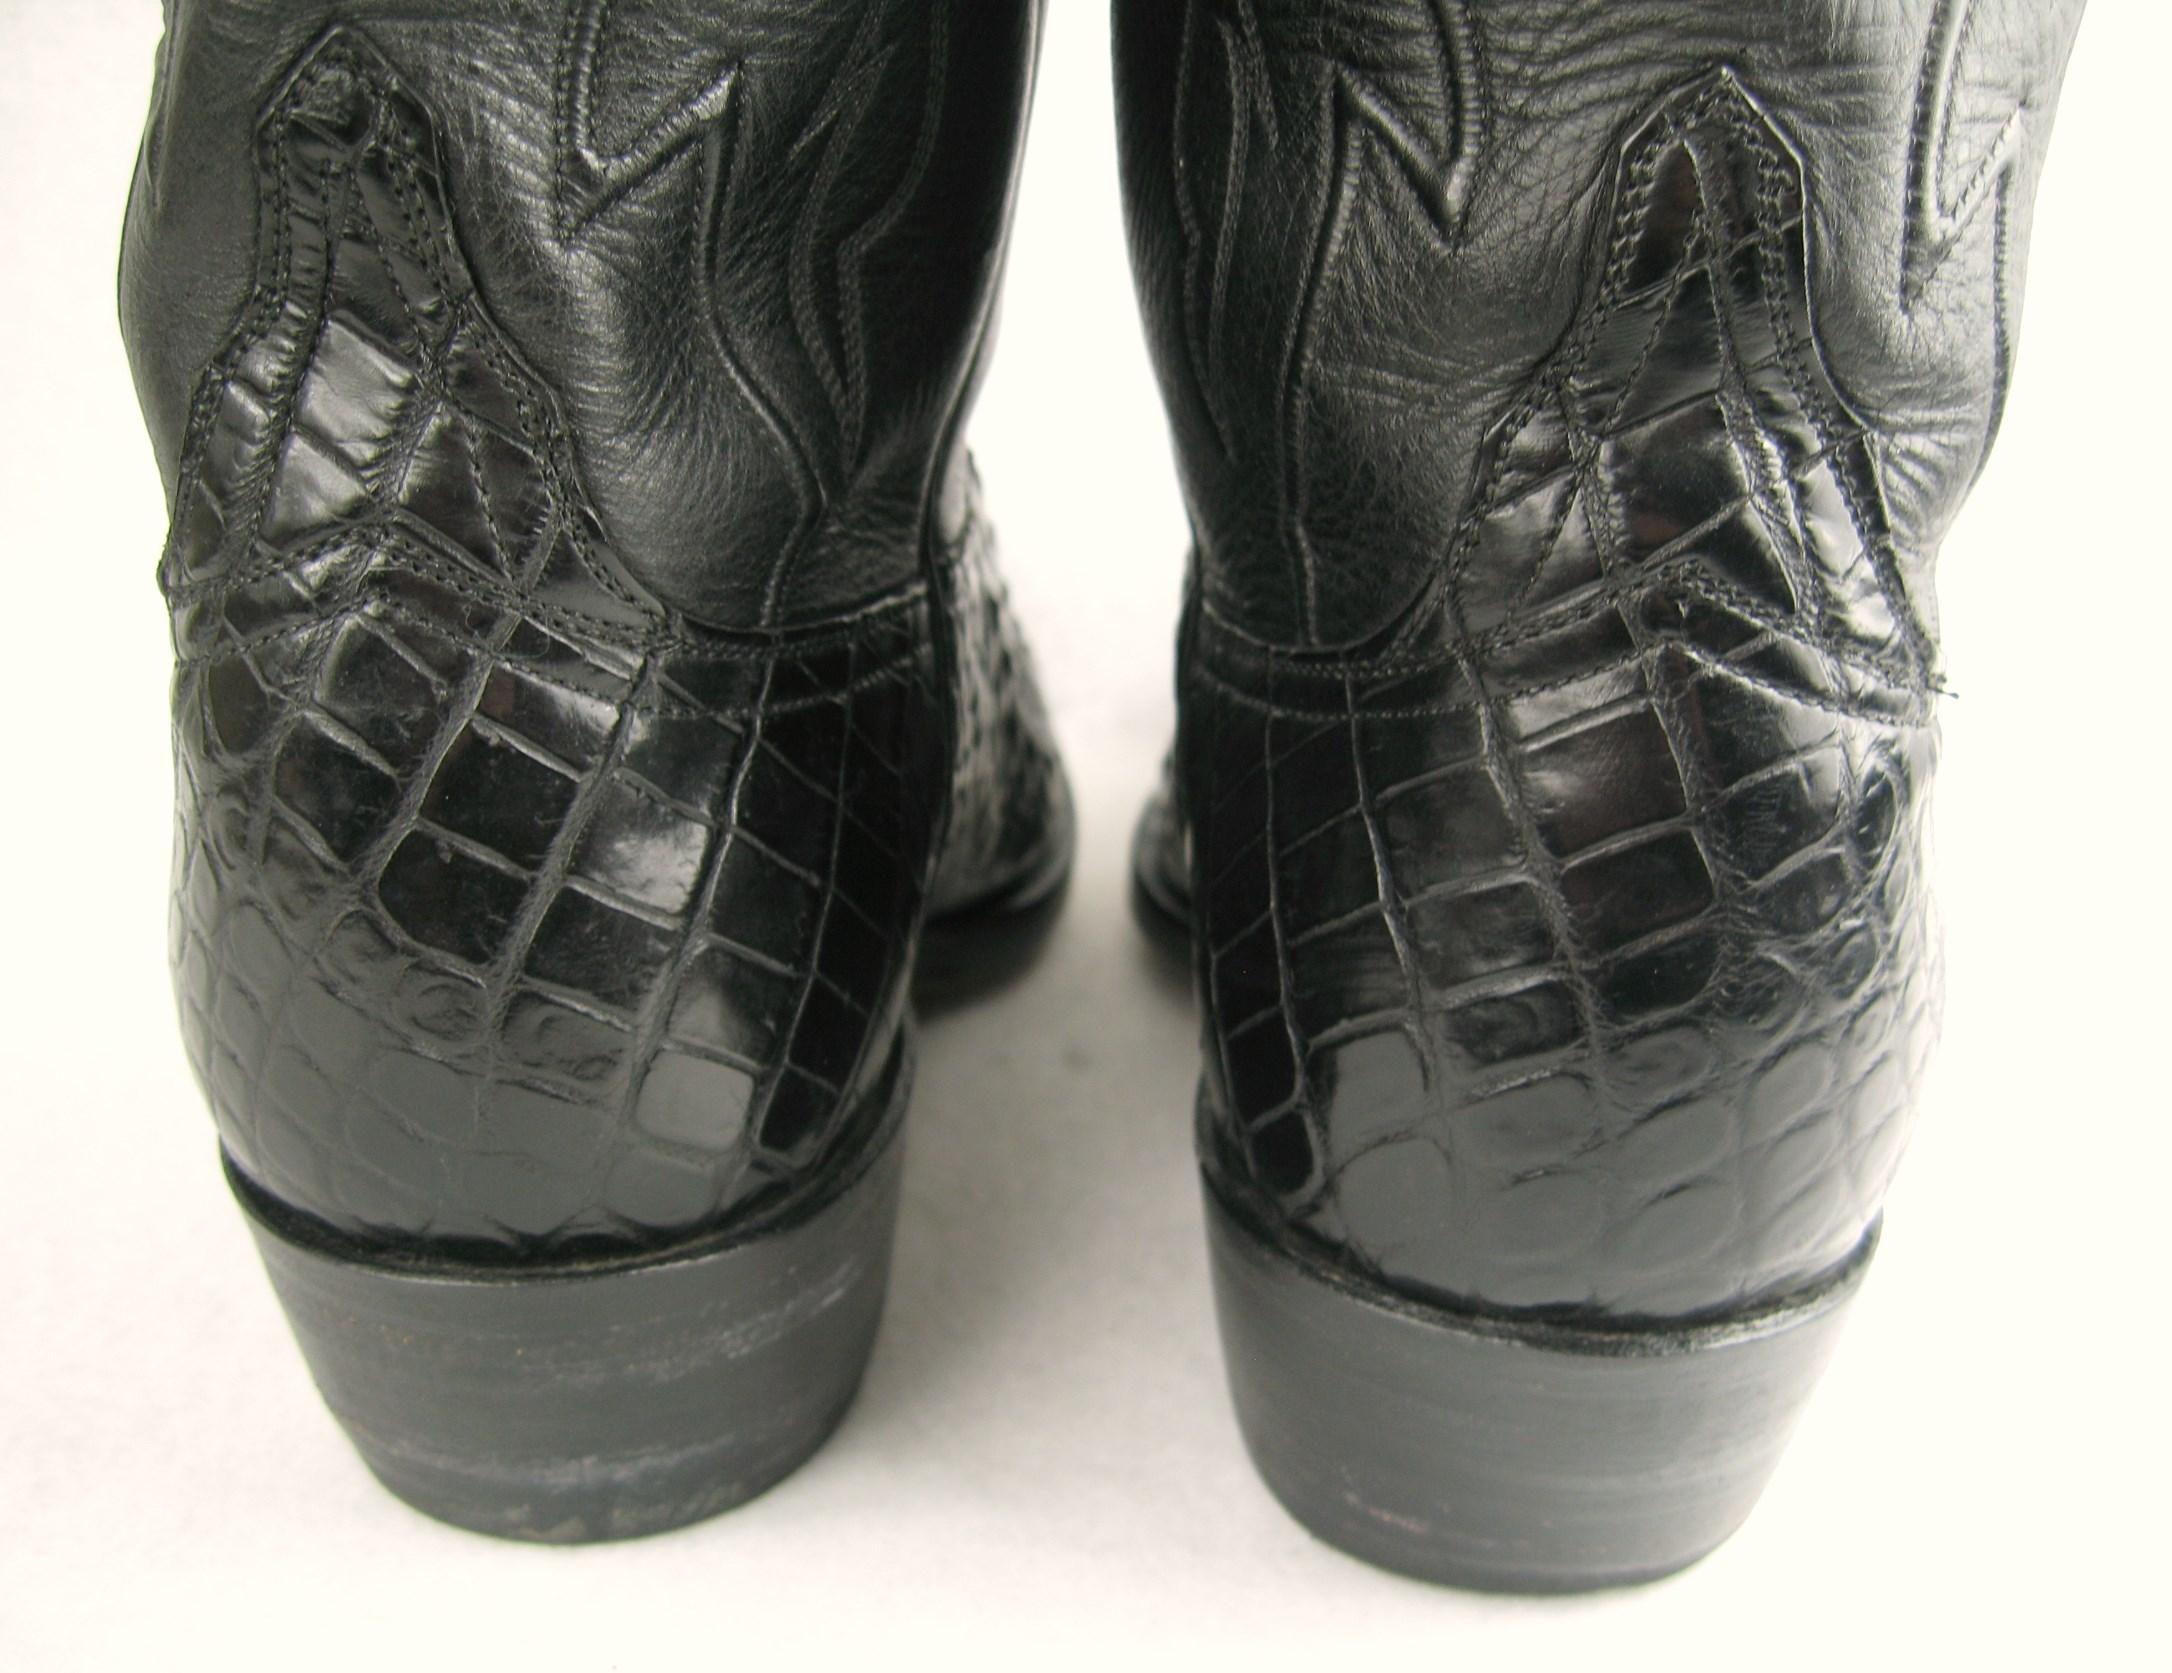 Lucchese Cowboy boots Handmade Horned Back Alligator - Black 10 D  In Good Condition For Sale In Wallkill, NY